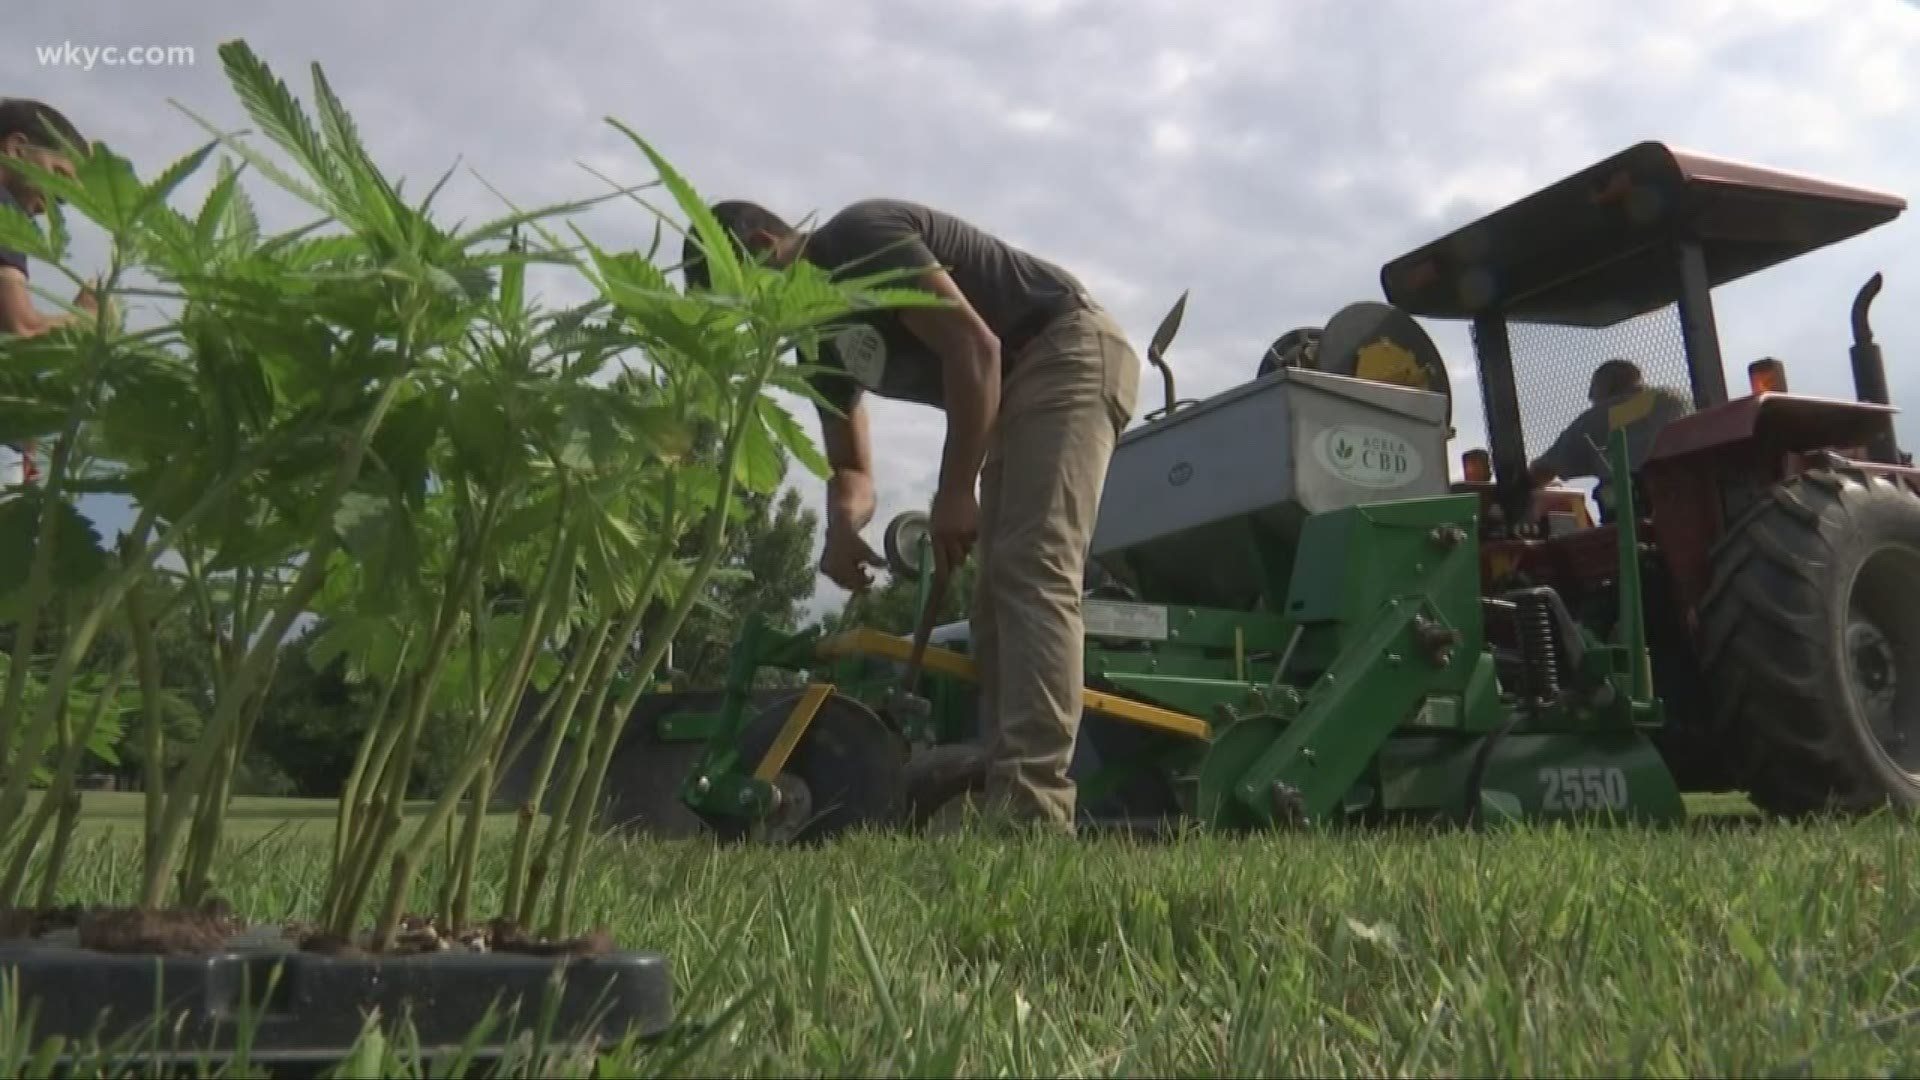 The Ohio Department of Agriculture submitted its plan to the USDA on December 13. To produce hemp, growers must be licensed or authorized under the state's program.